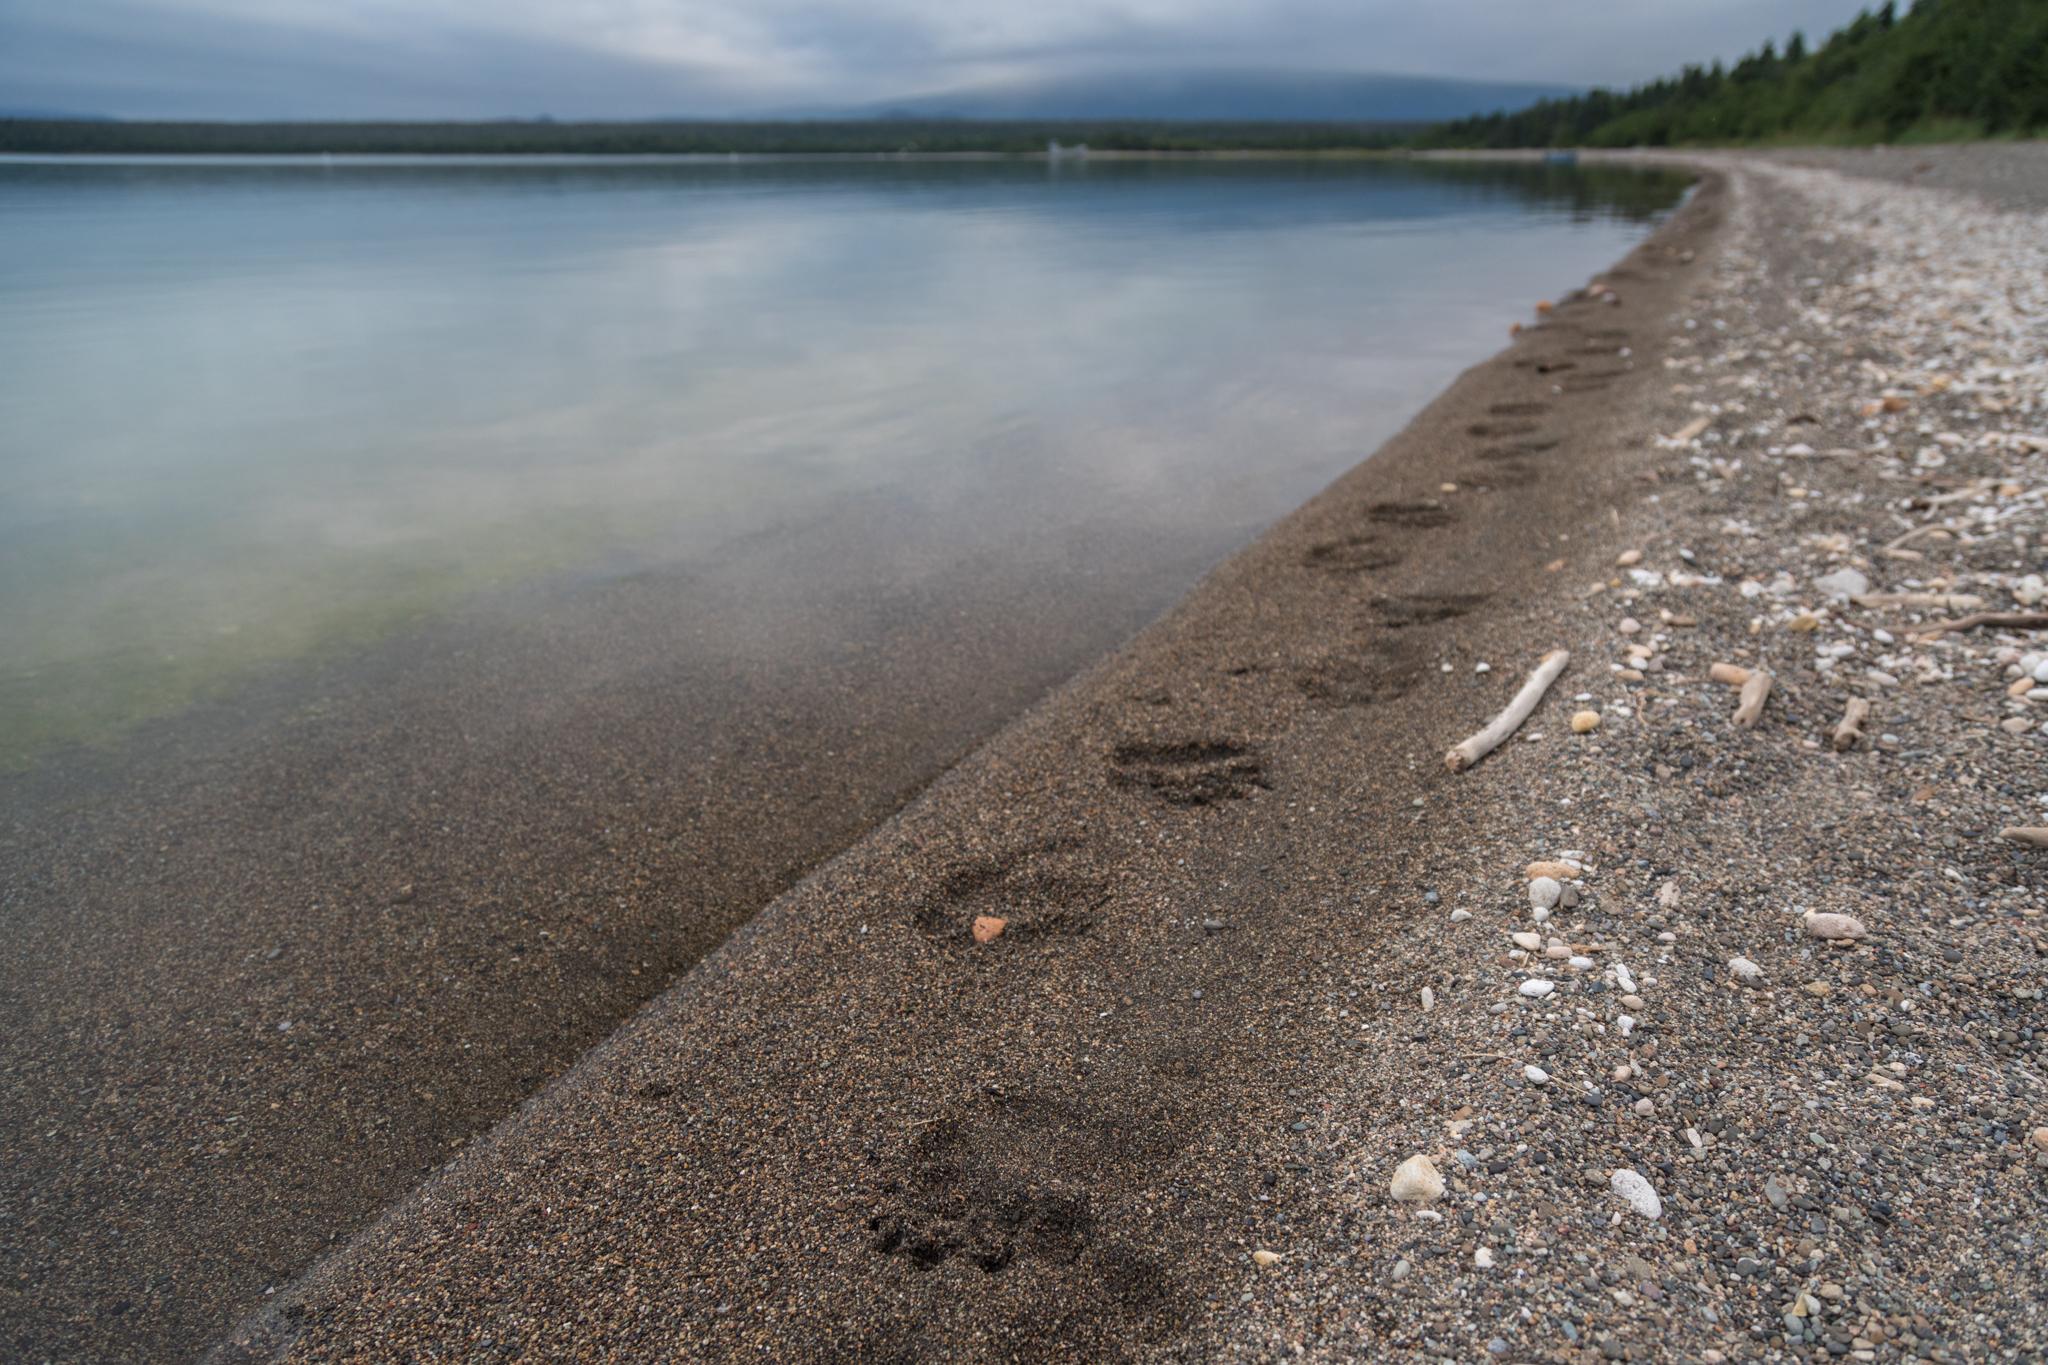 Brown bear tracks dot the beach of Naknek Lake, at Brooks Camp. The spot has become increasingly popular thanks to a live webcam on Explore.org, which millions around the world watch every year.